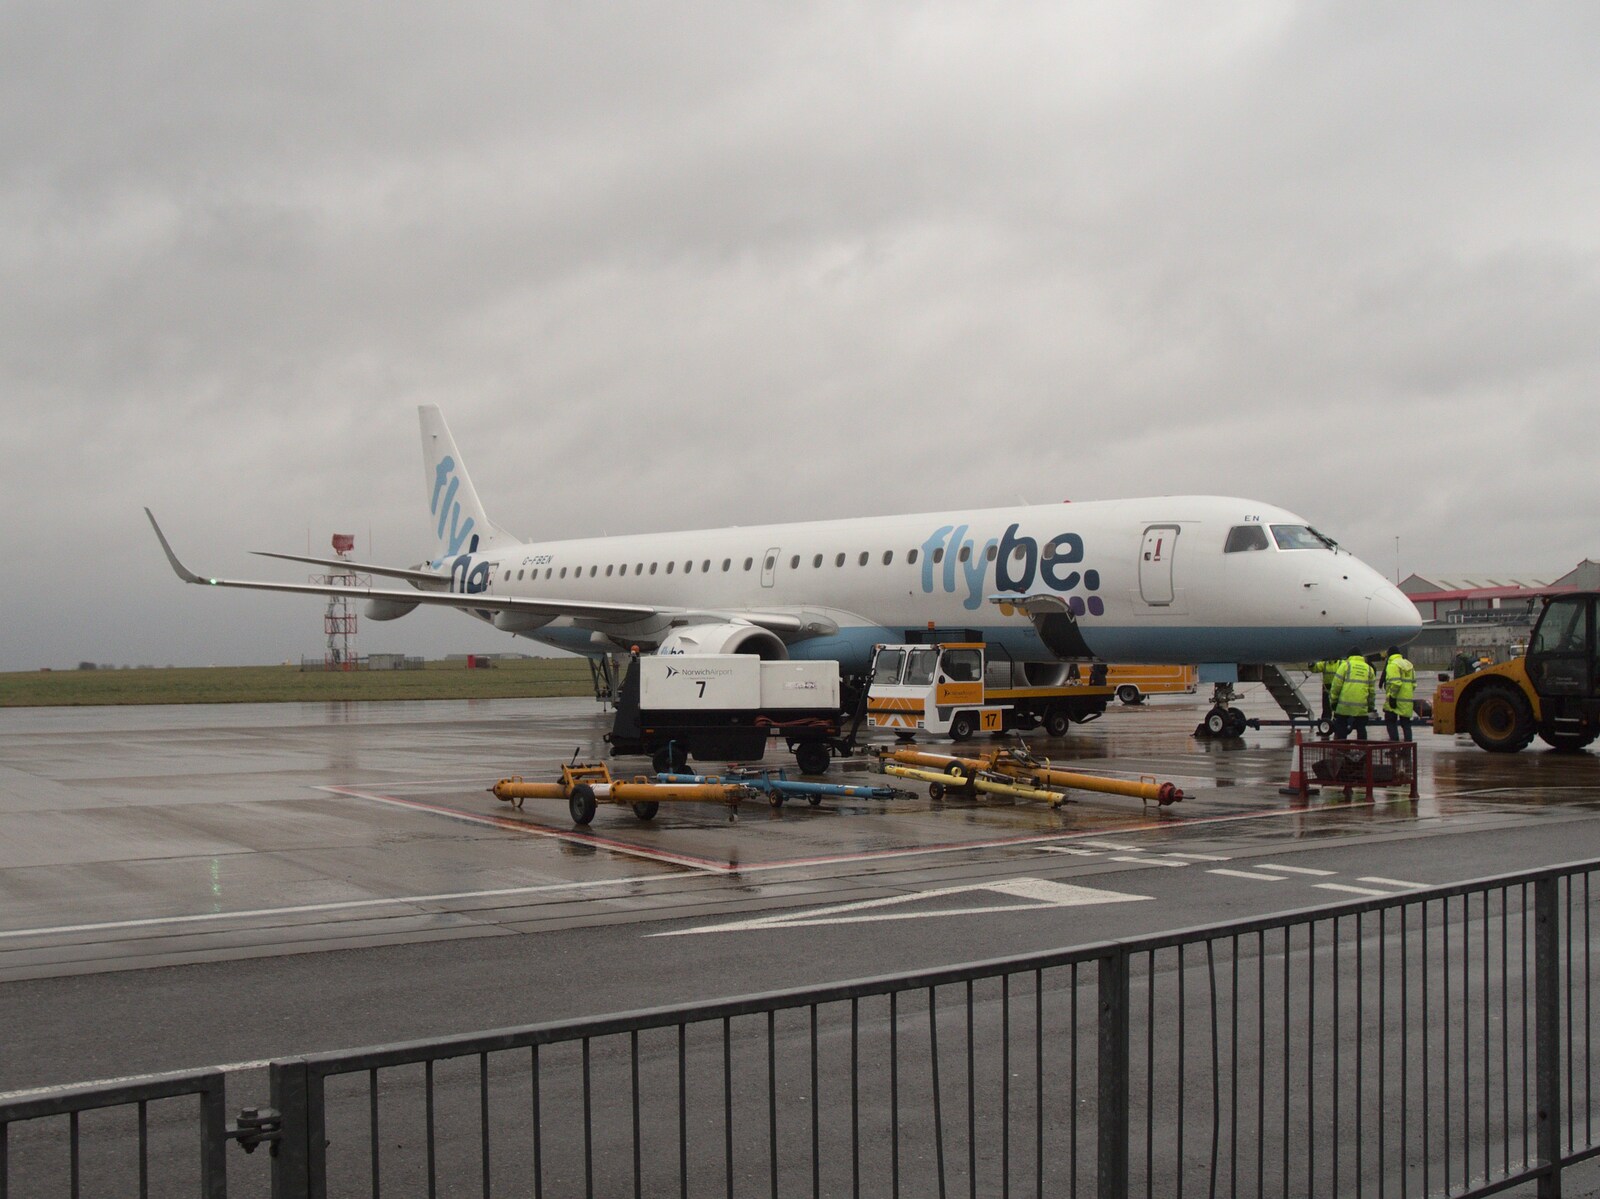 Our FlyBe jet on the apron at Norwich from An End-of-Year Trip to Spreyton, Devon - 29th December 2017